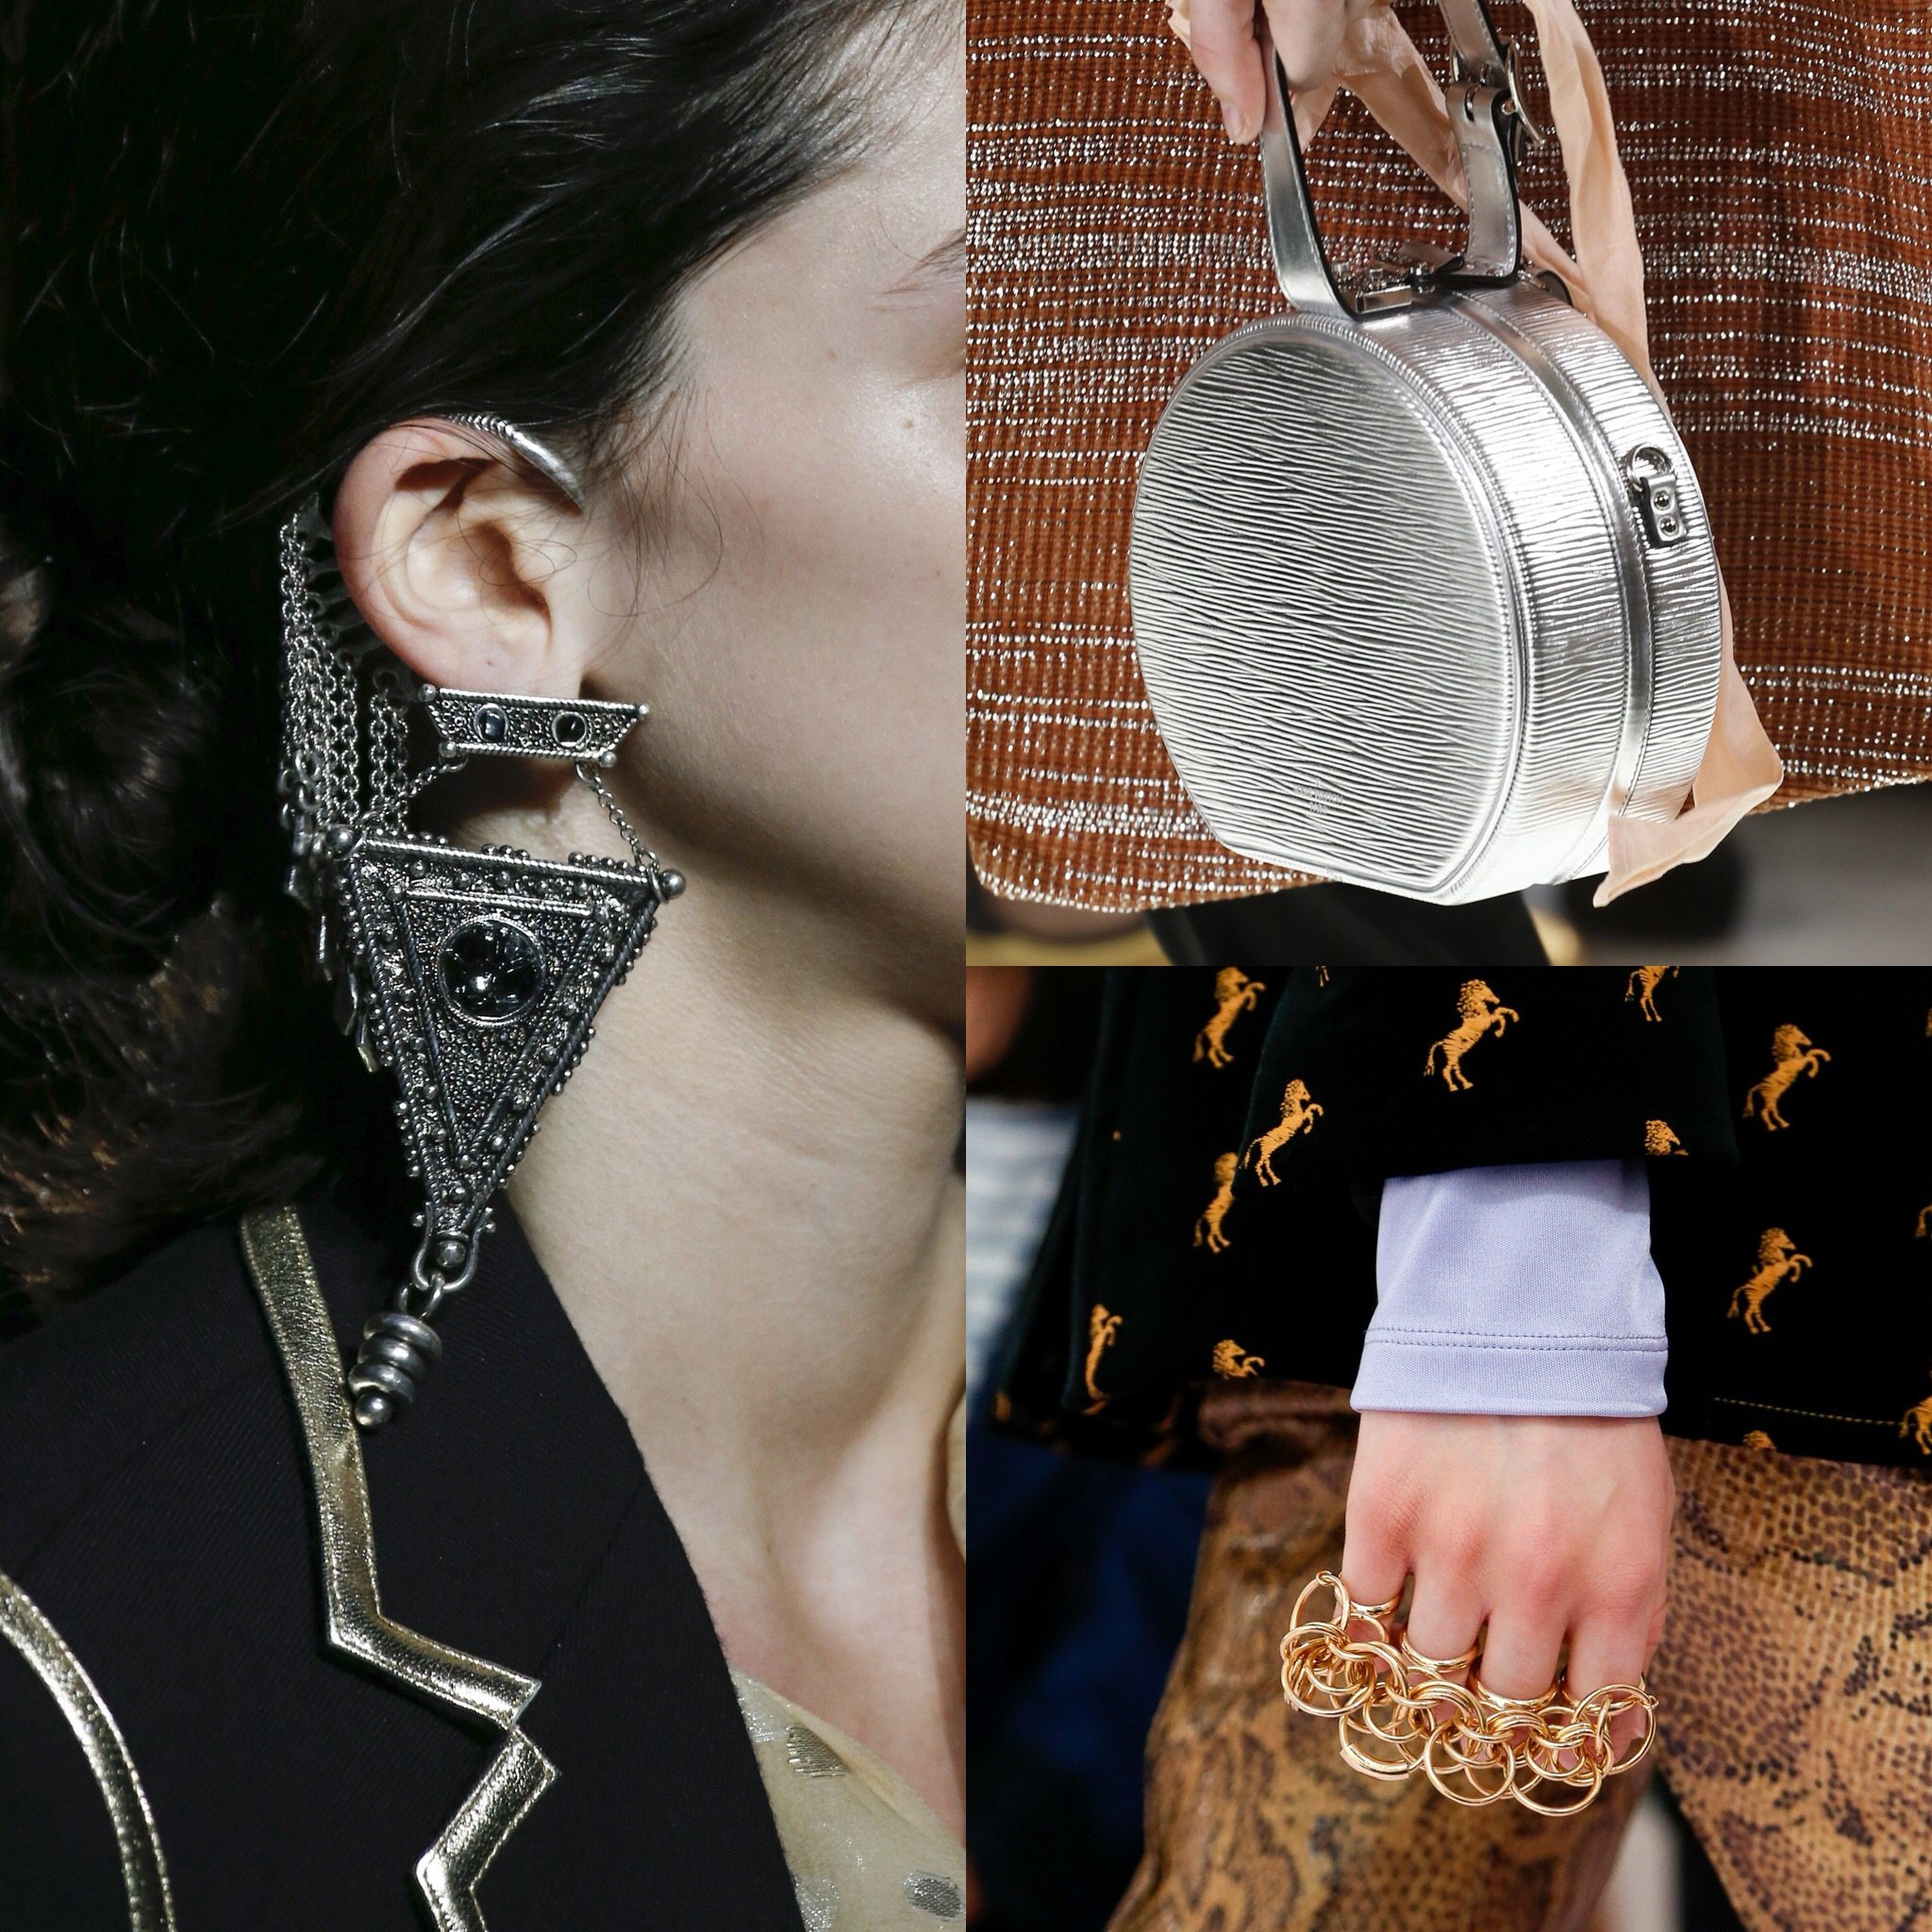 Spring 2018 Trends: Fashion Week coverage - Spring 2018 Accessories: Saint Laurent earrings - Chloe rings - Louis Vitton silver round bag. More spring 2018 fashion week coverage on Houseofcomil.com. Pictures from Vogue